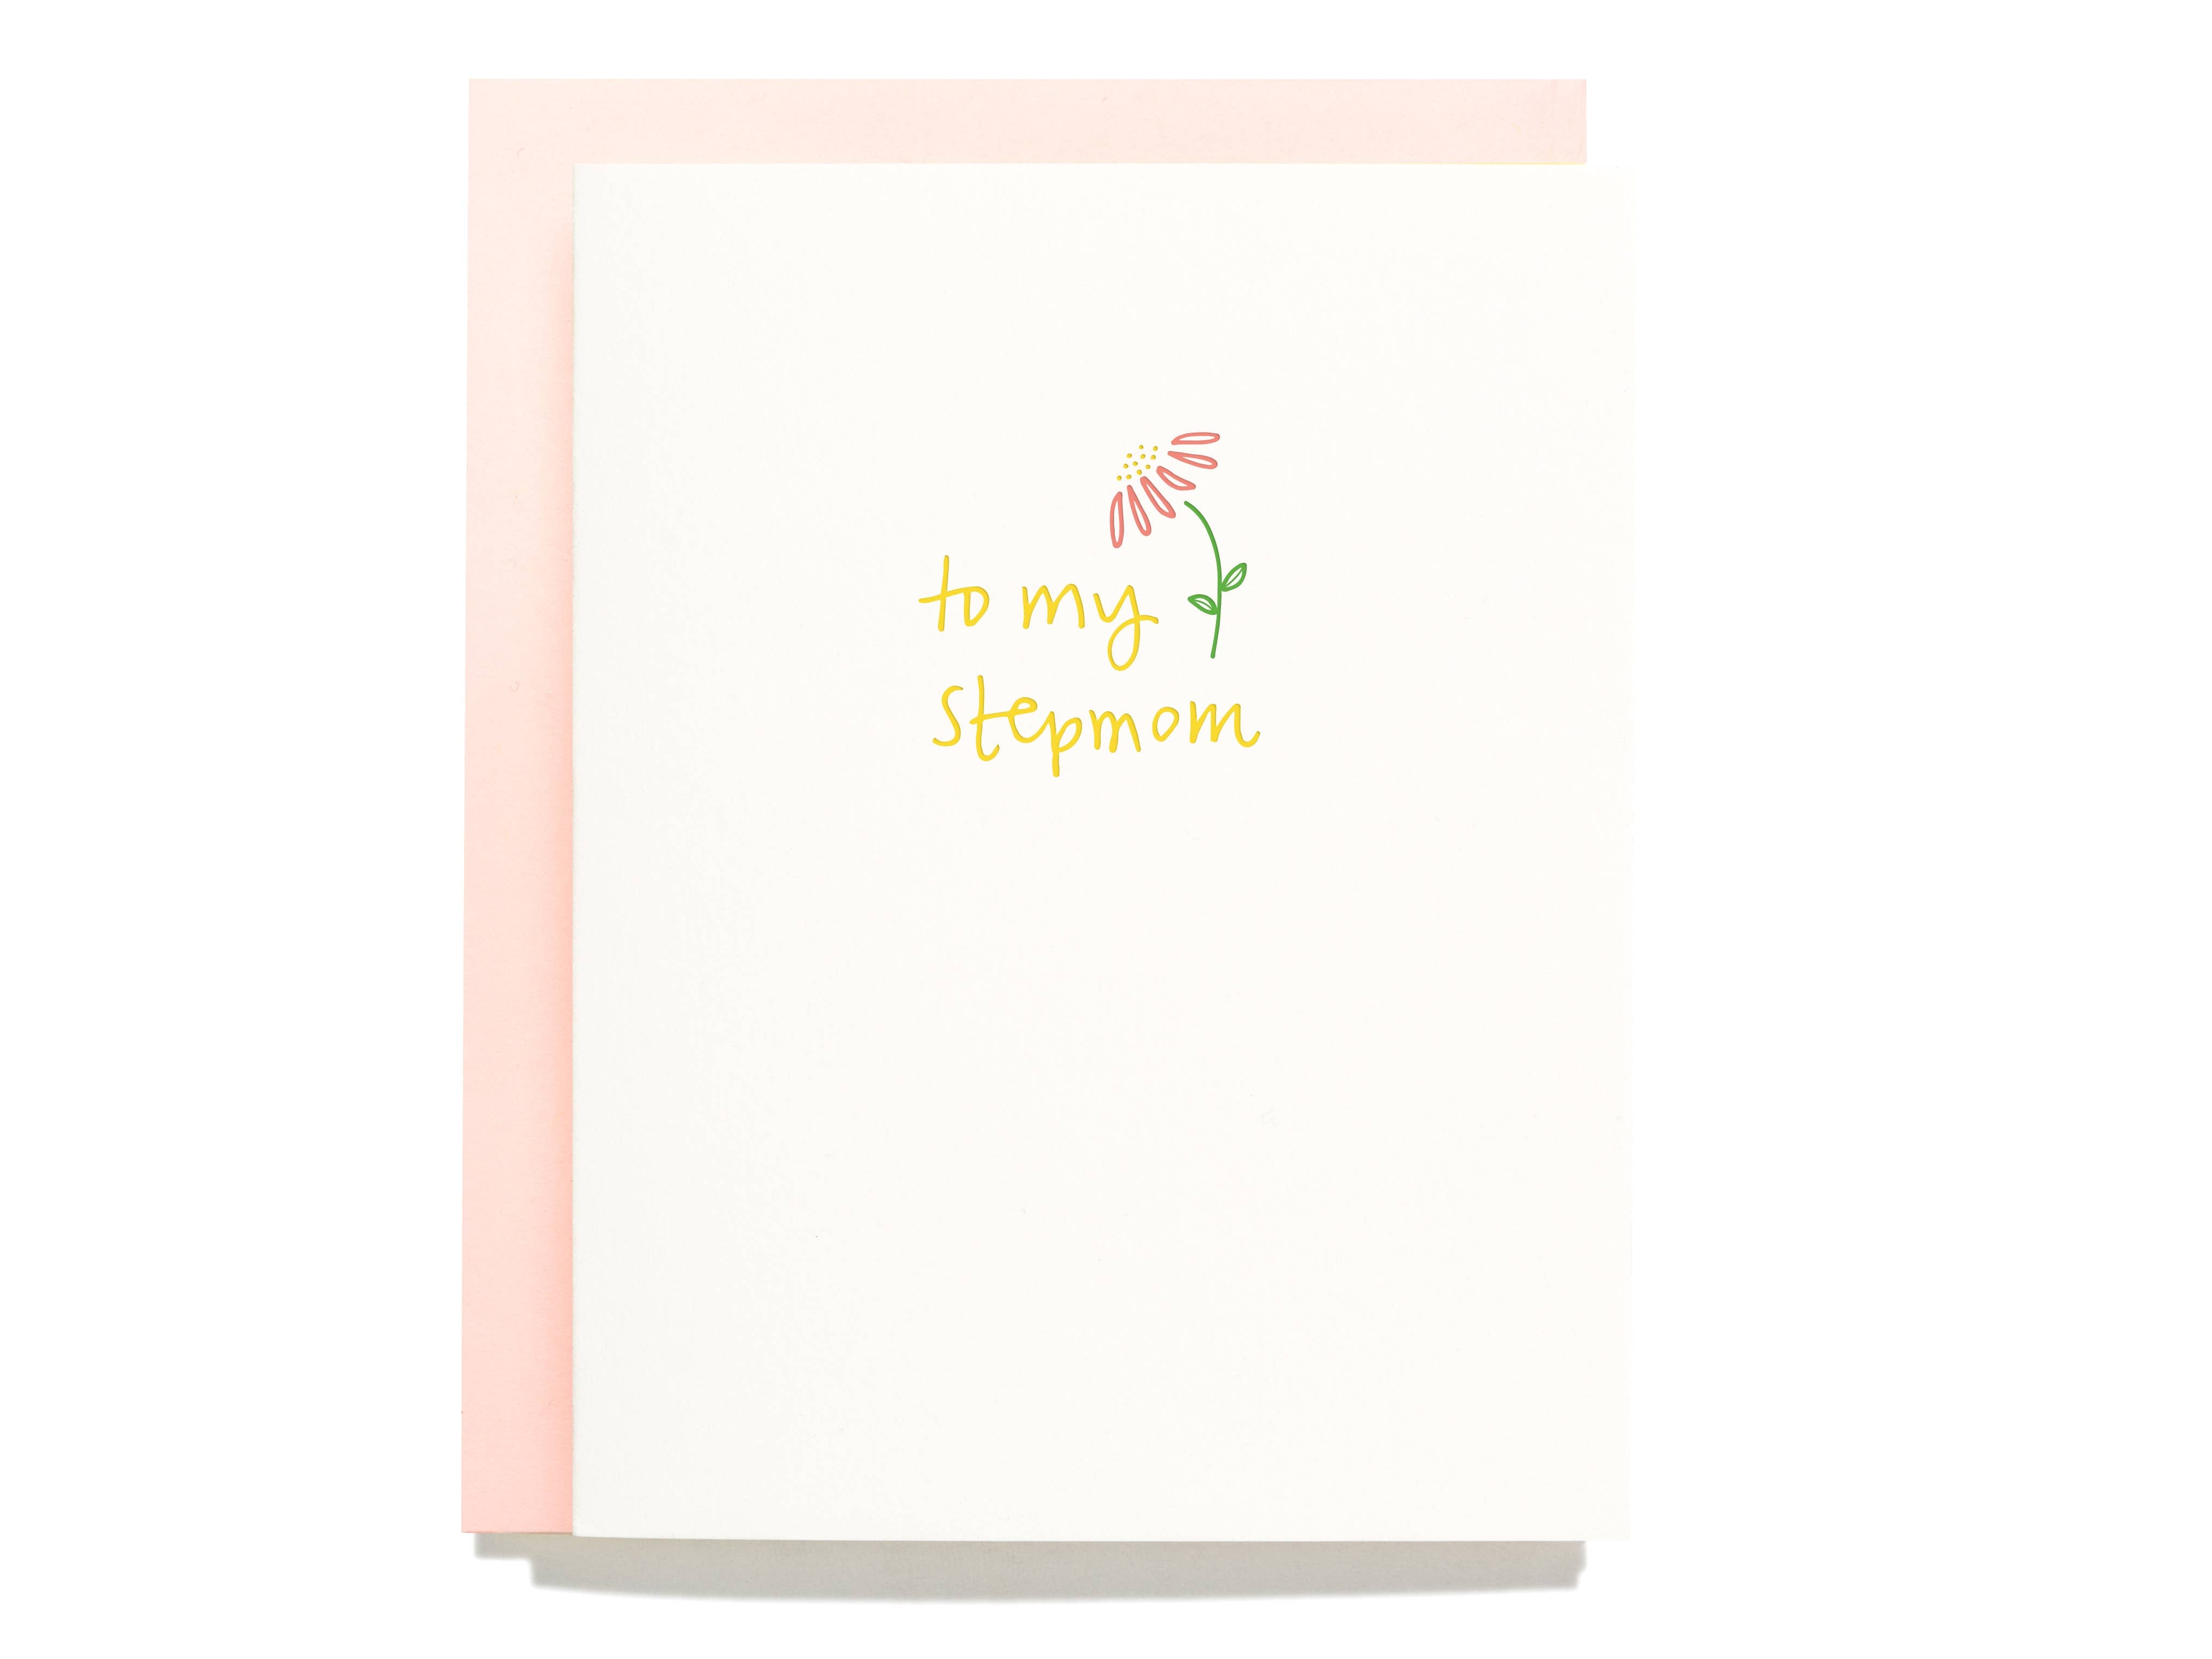 White card with yellow text saying, “To My Stepmom”. Images of a pink daisy with green stem on right side of text. A light pink envelope is included.